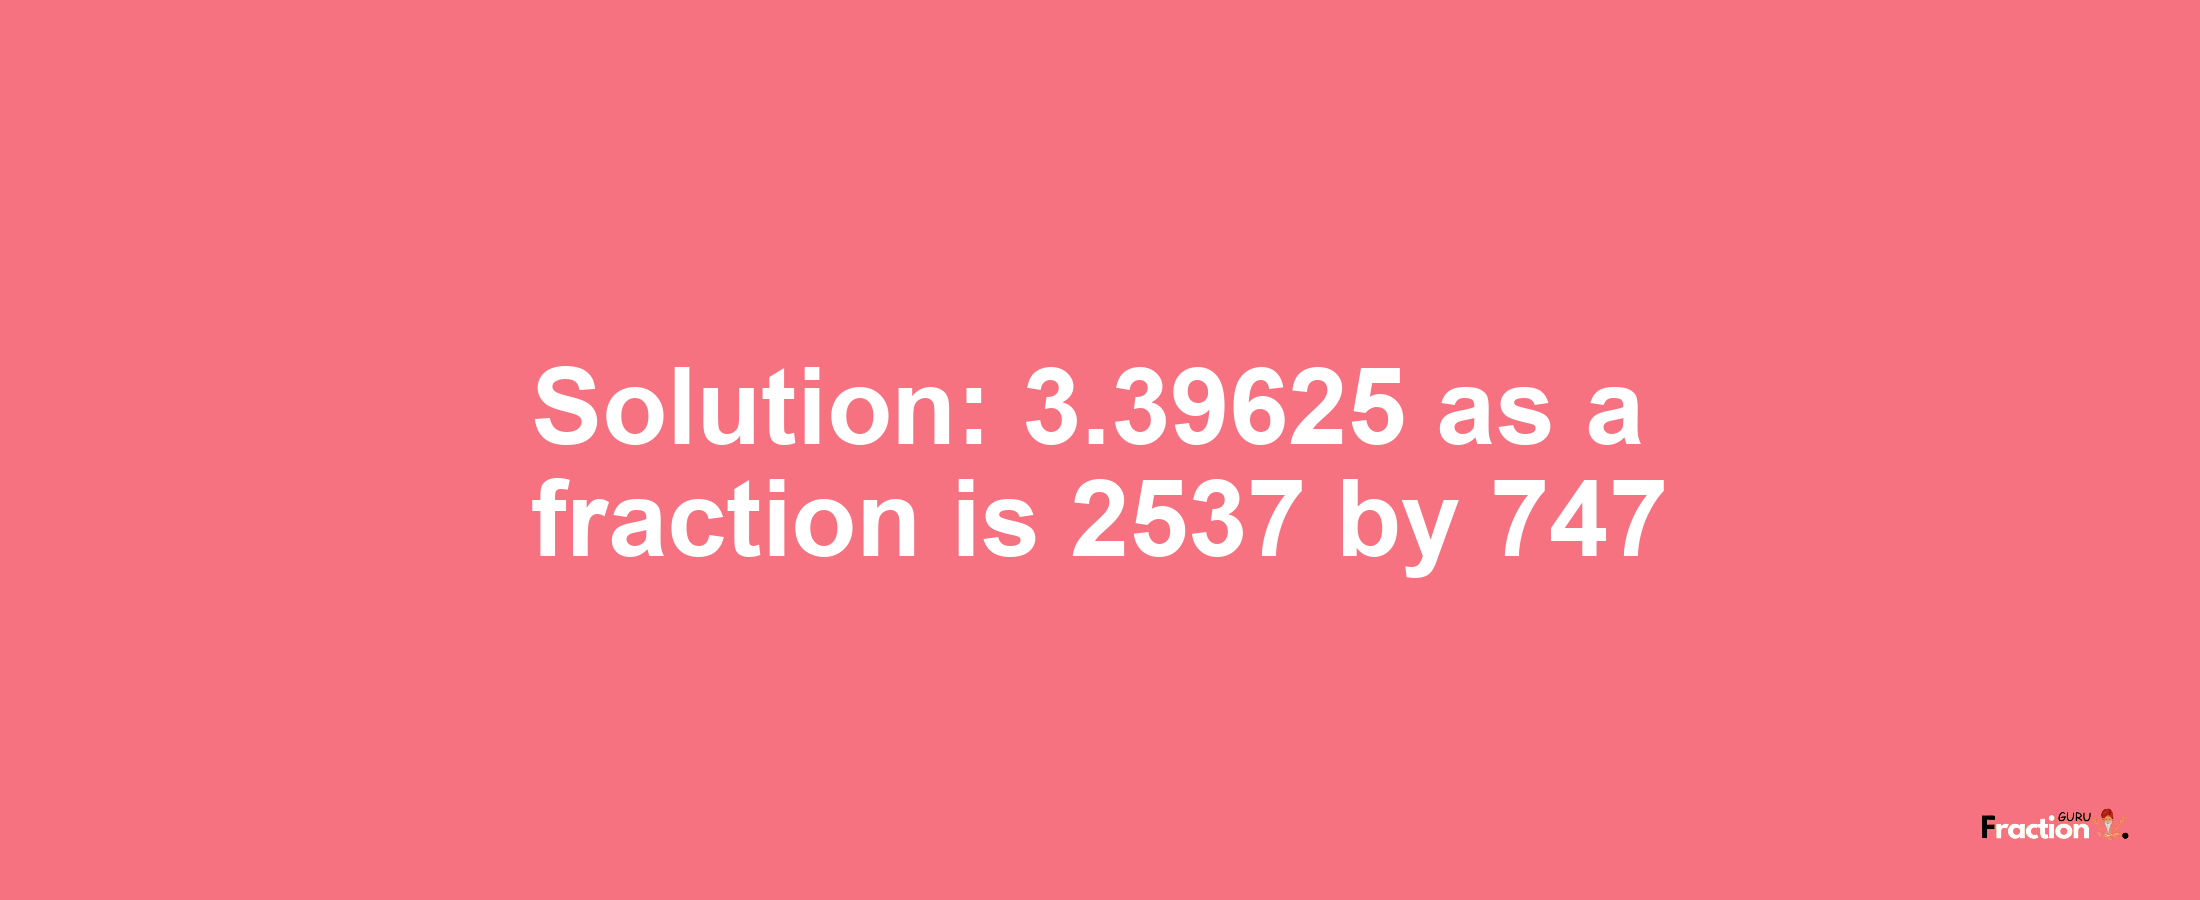 Solution:3.39625 as a fraction is 2537/747